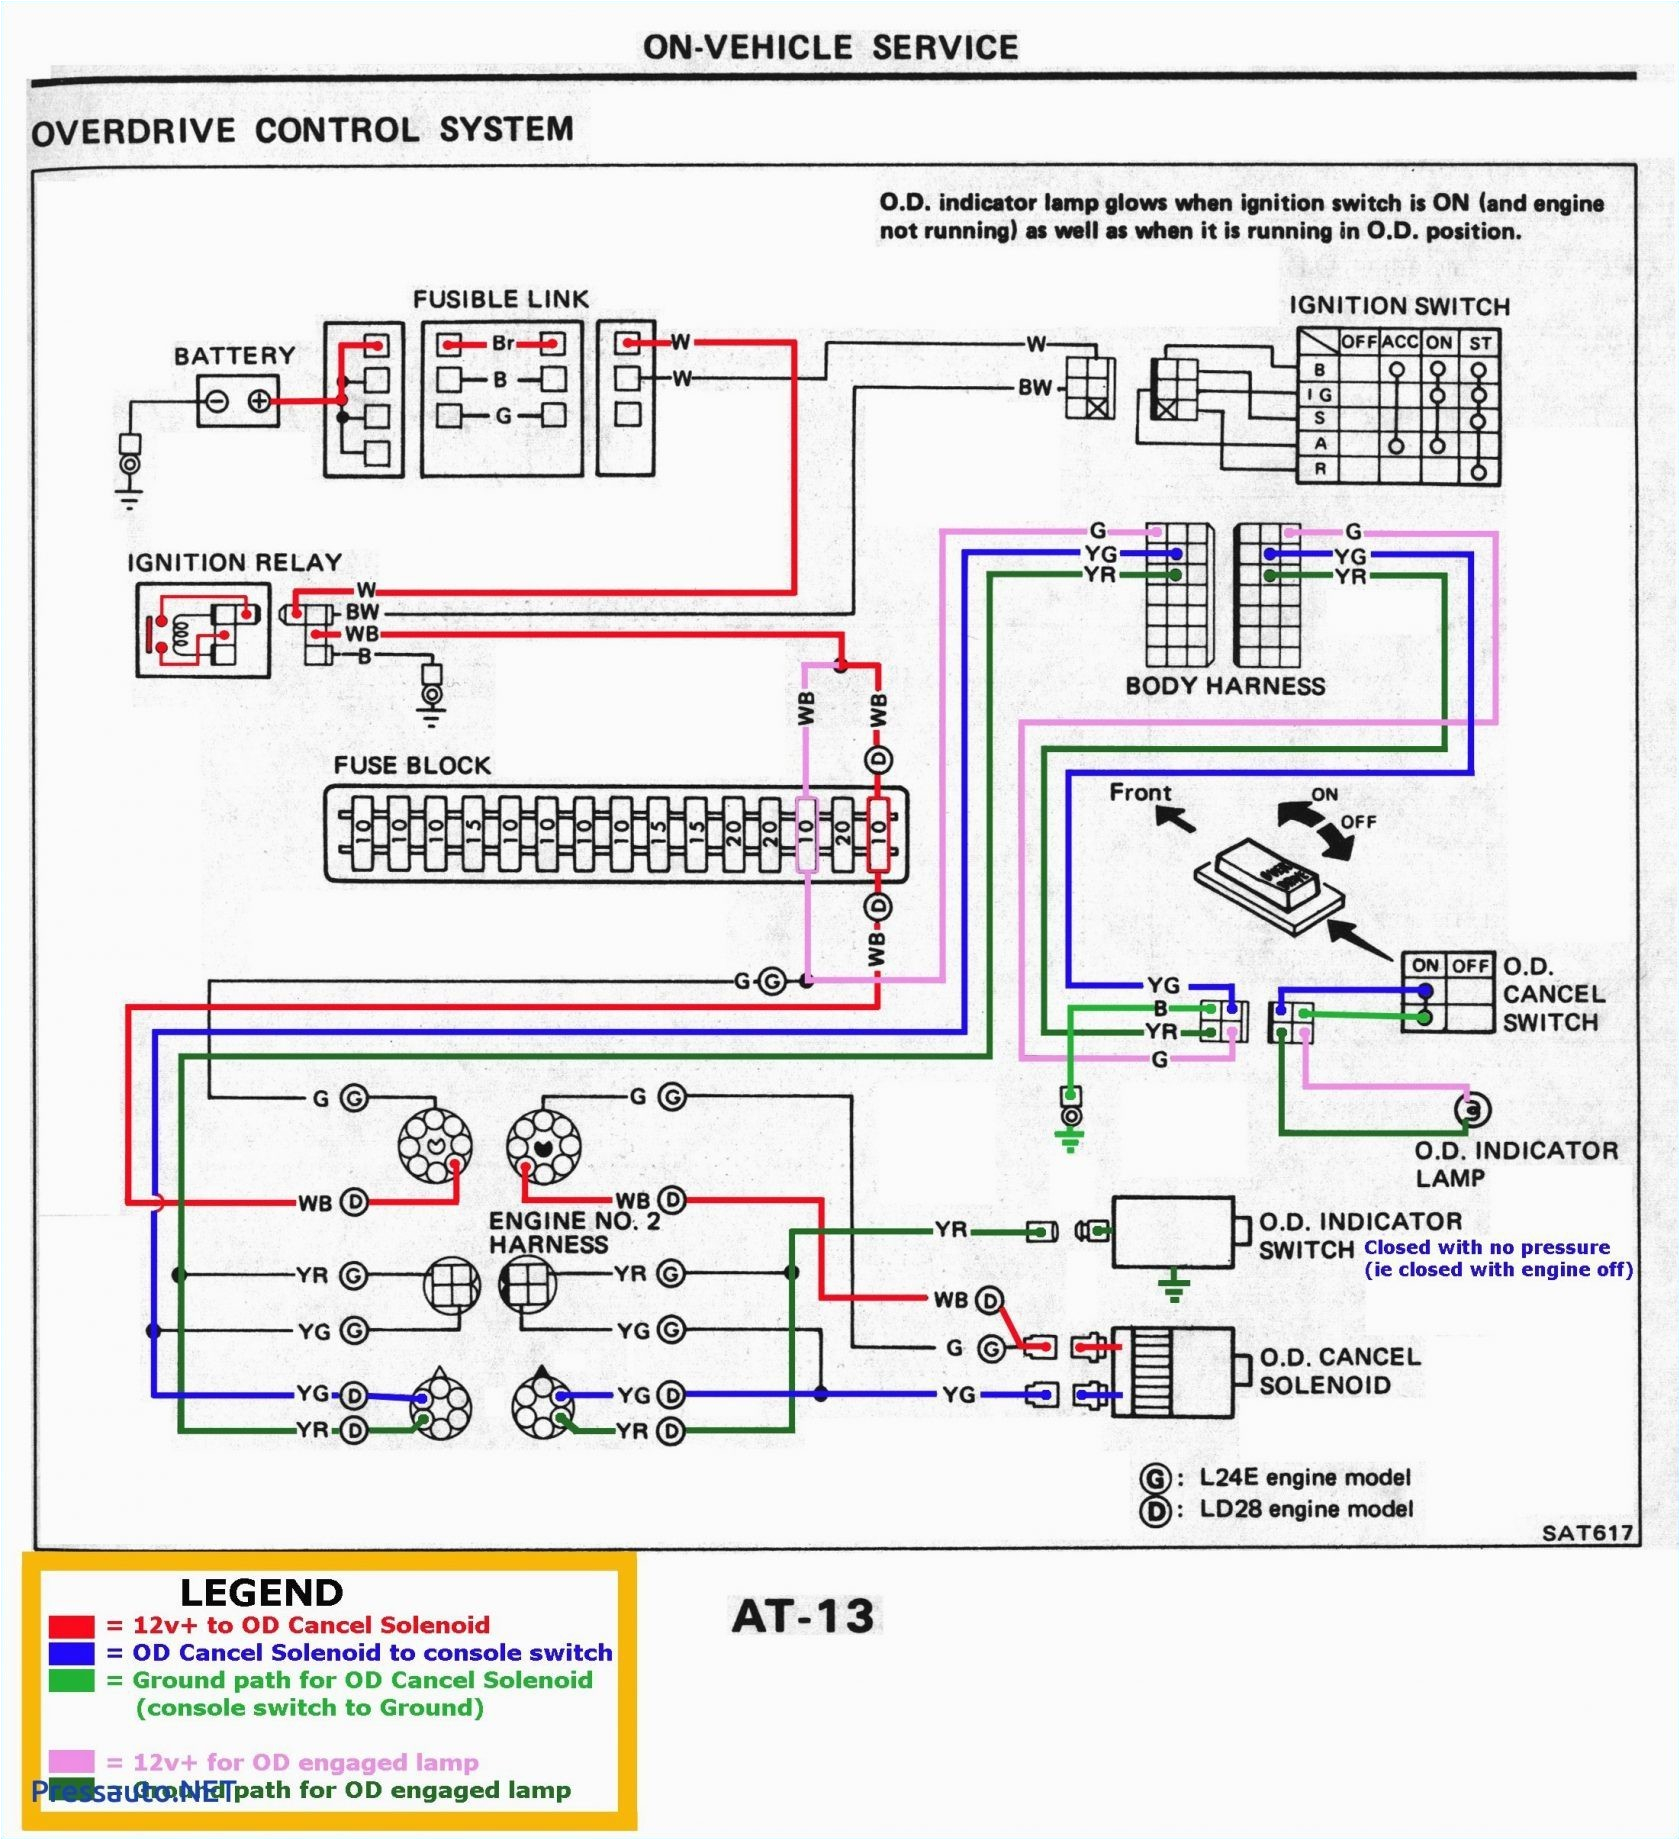 eagle light switch wiring diagram wiring diagram eagle light switch diagram